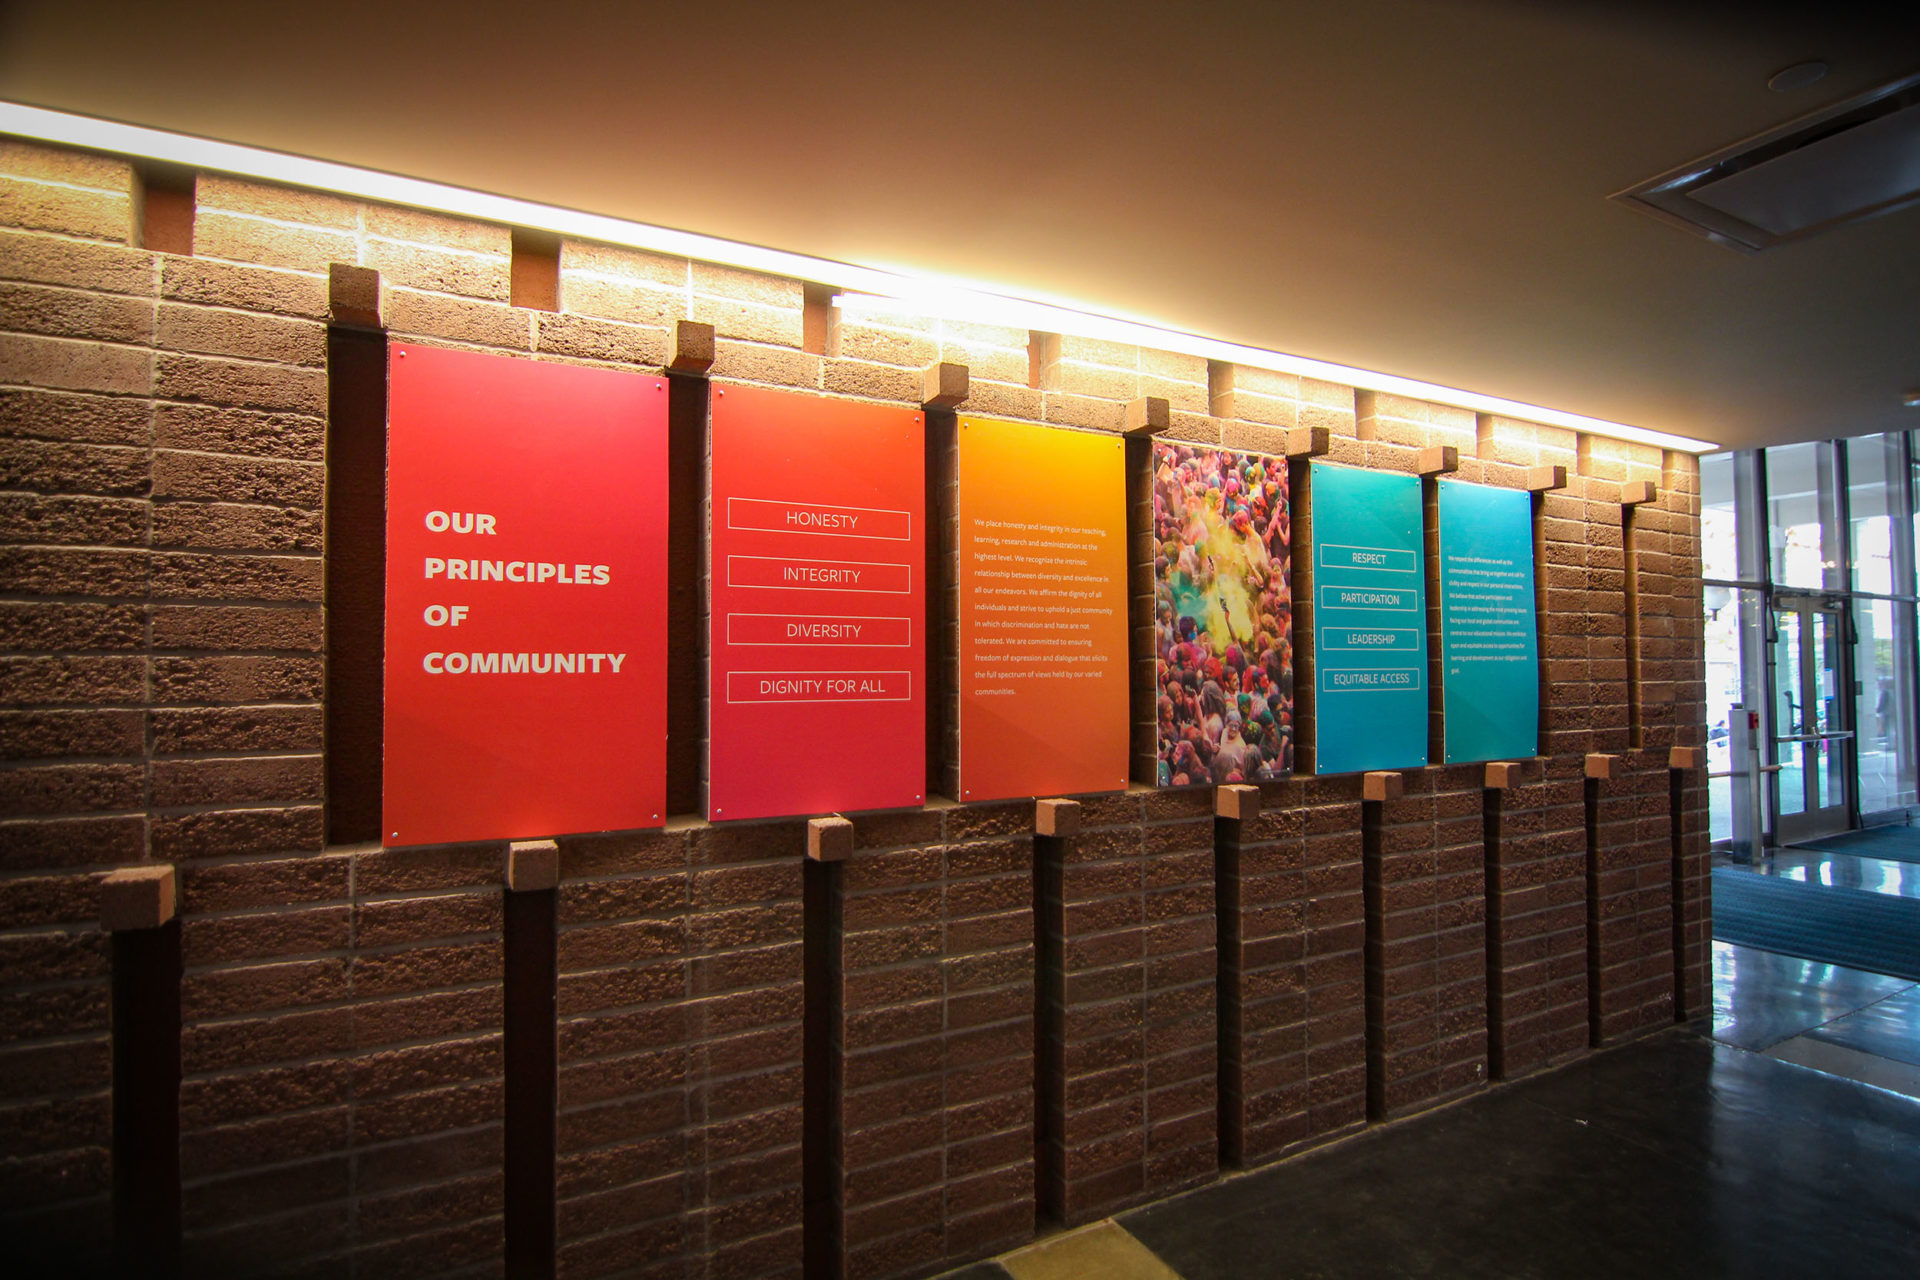 "Our Principles of Community" is an installation in the ASUC Student Union.